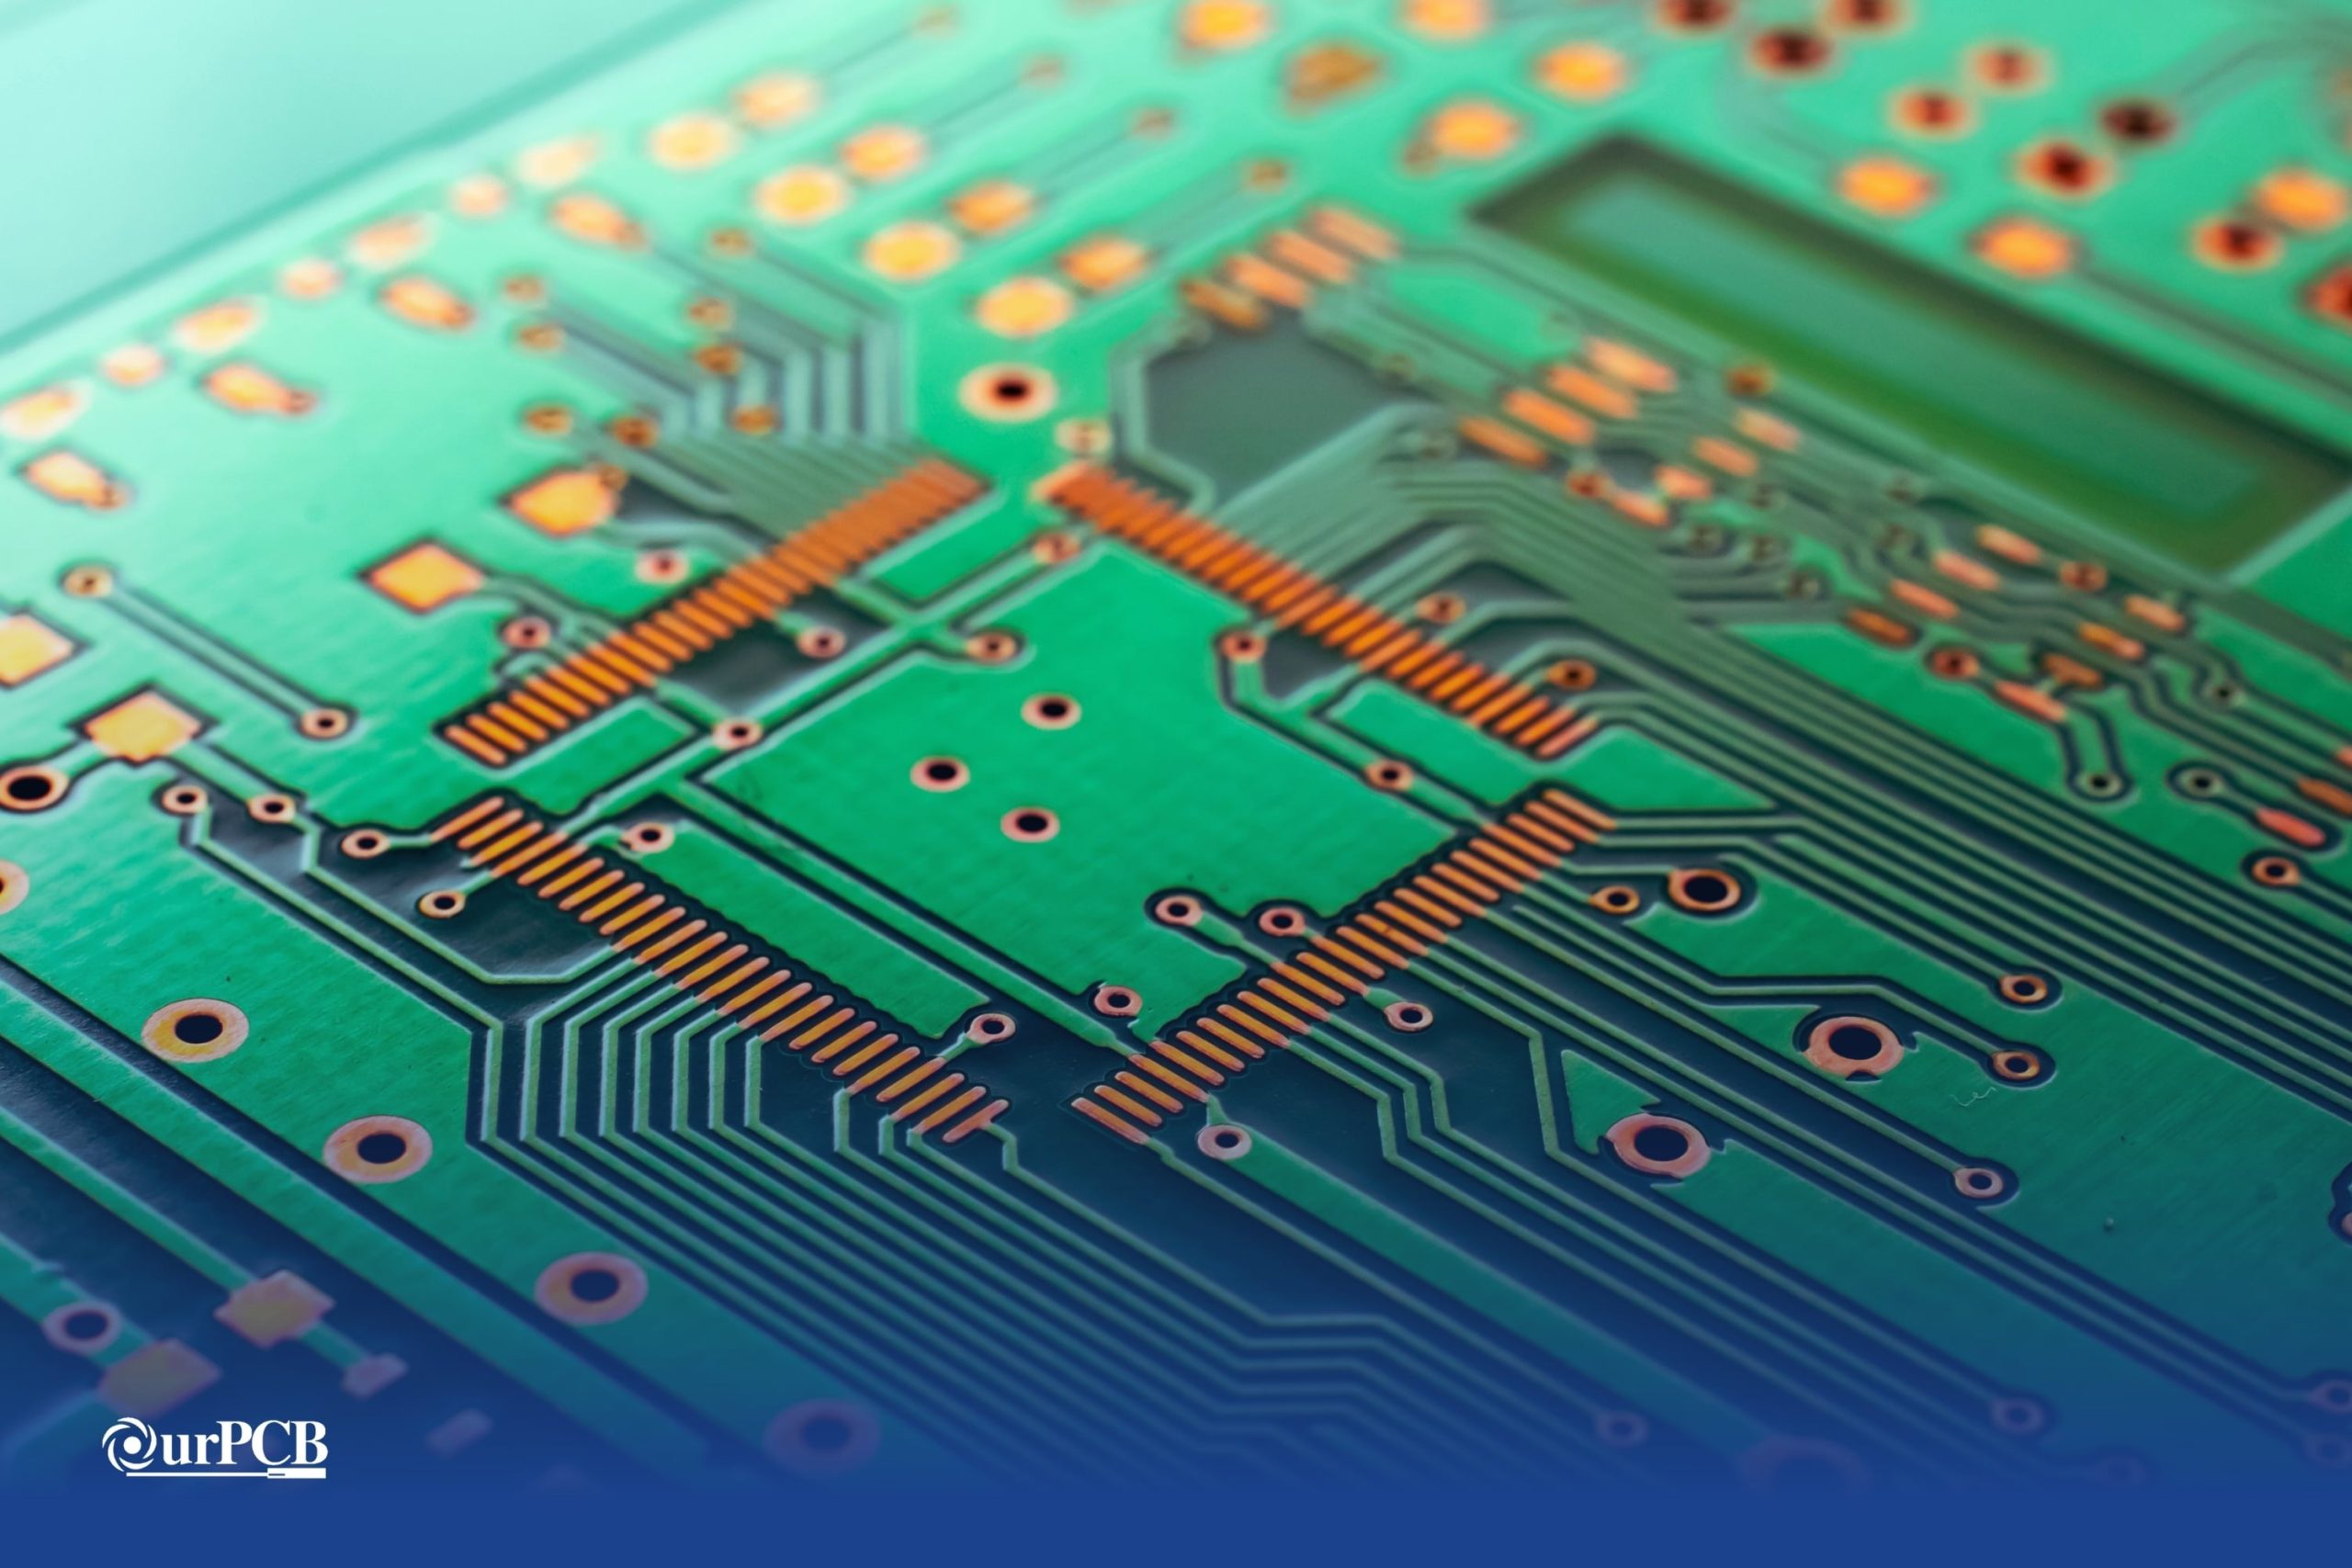 What is Printed Circuit Board?